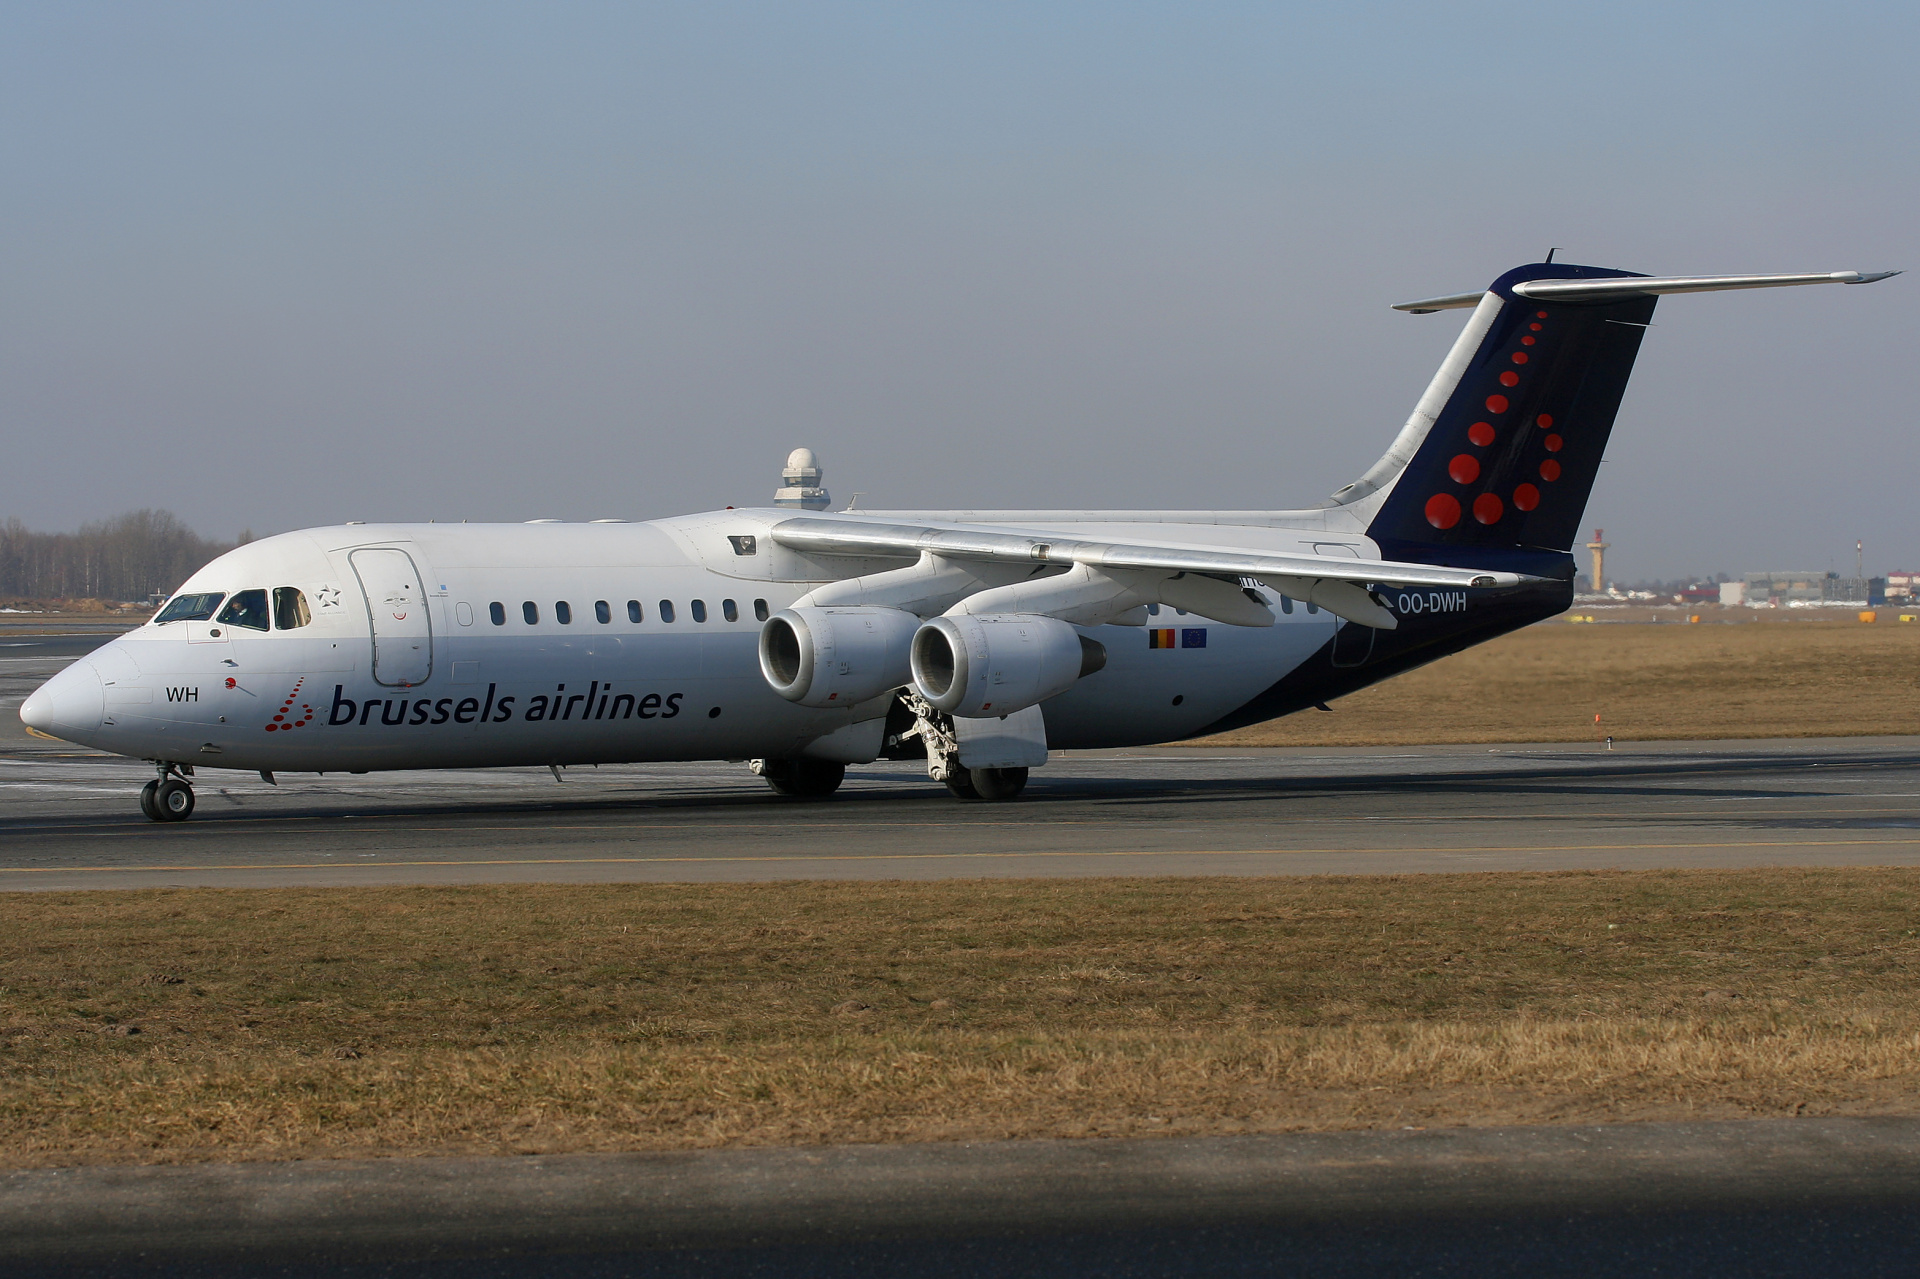 OO-DWH (Aircraft » EPWA Spotting » BAe 146 and revisions » Avro RJ100 » Brussels Airlines)